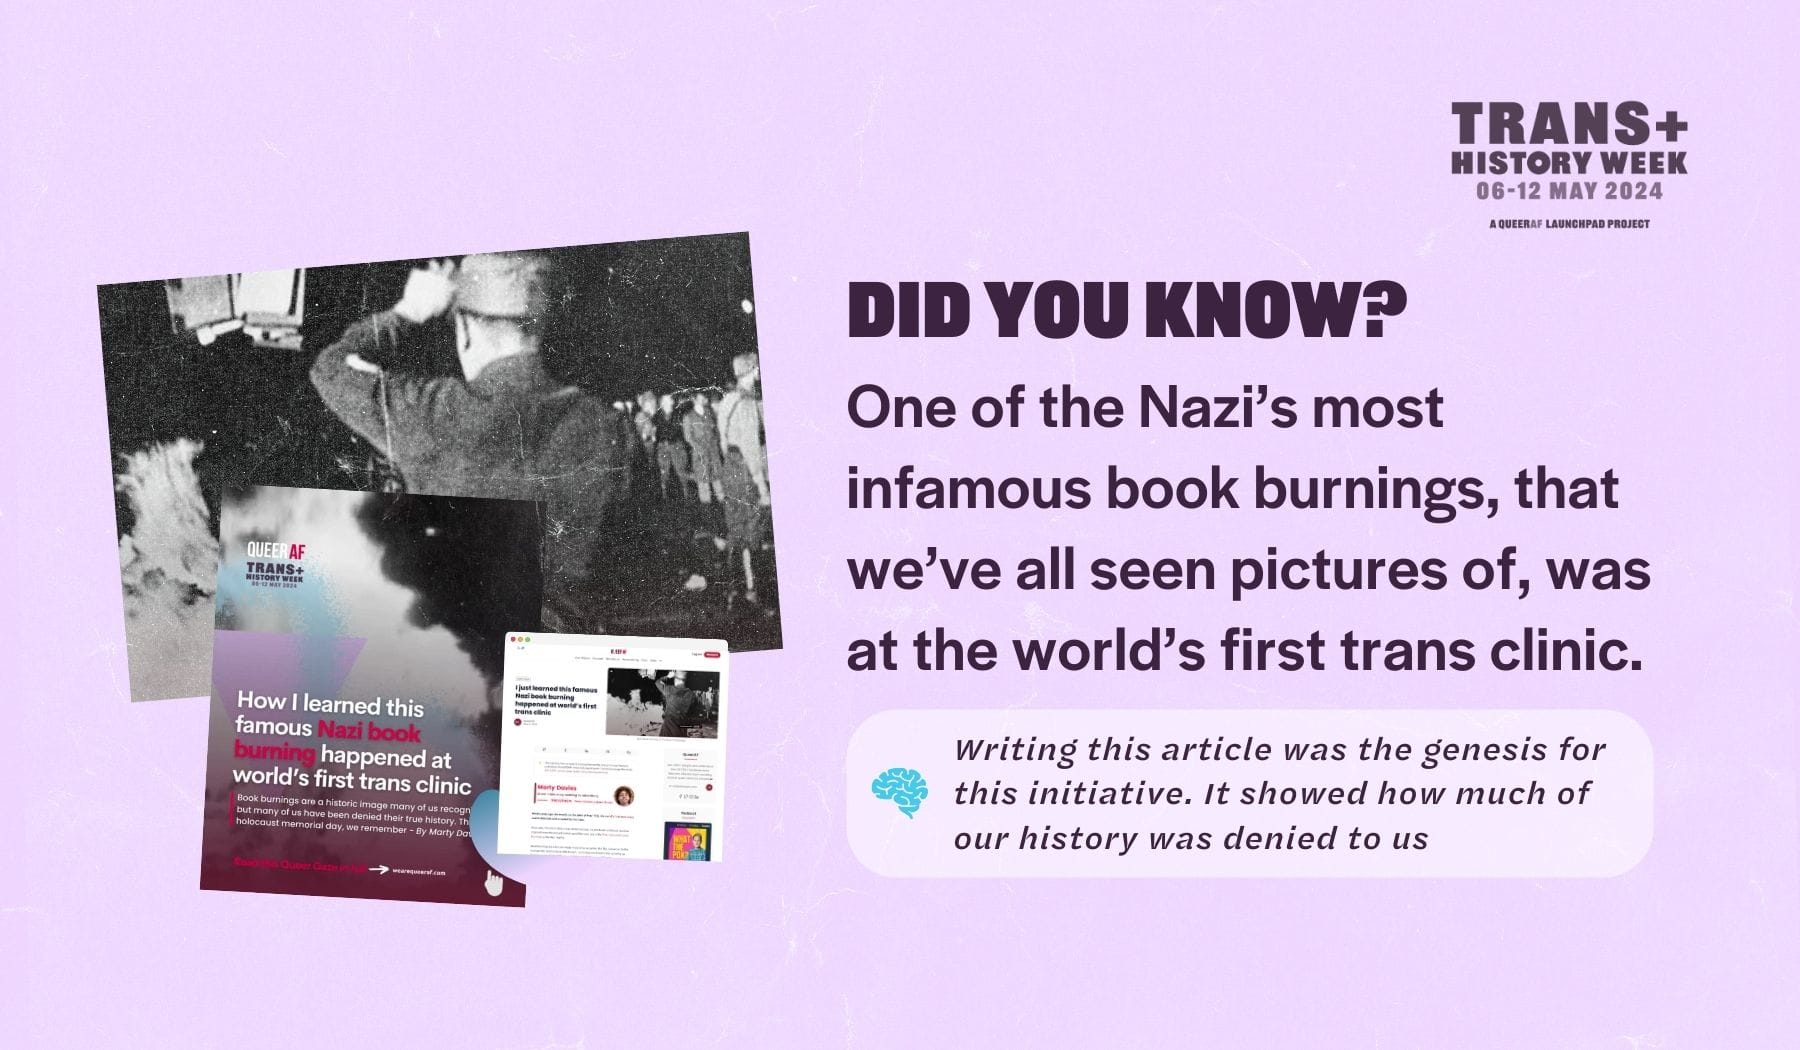 Did you know? One of the Nazi’s most infamous book burnings, that we’ve all seen pictures of, was at the world’s first trans clinic. Writing this article was the genesis for this initiative. It showed how much of our history was denied to us